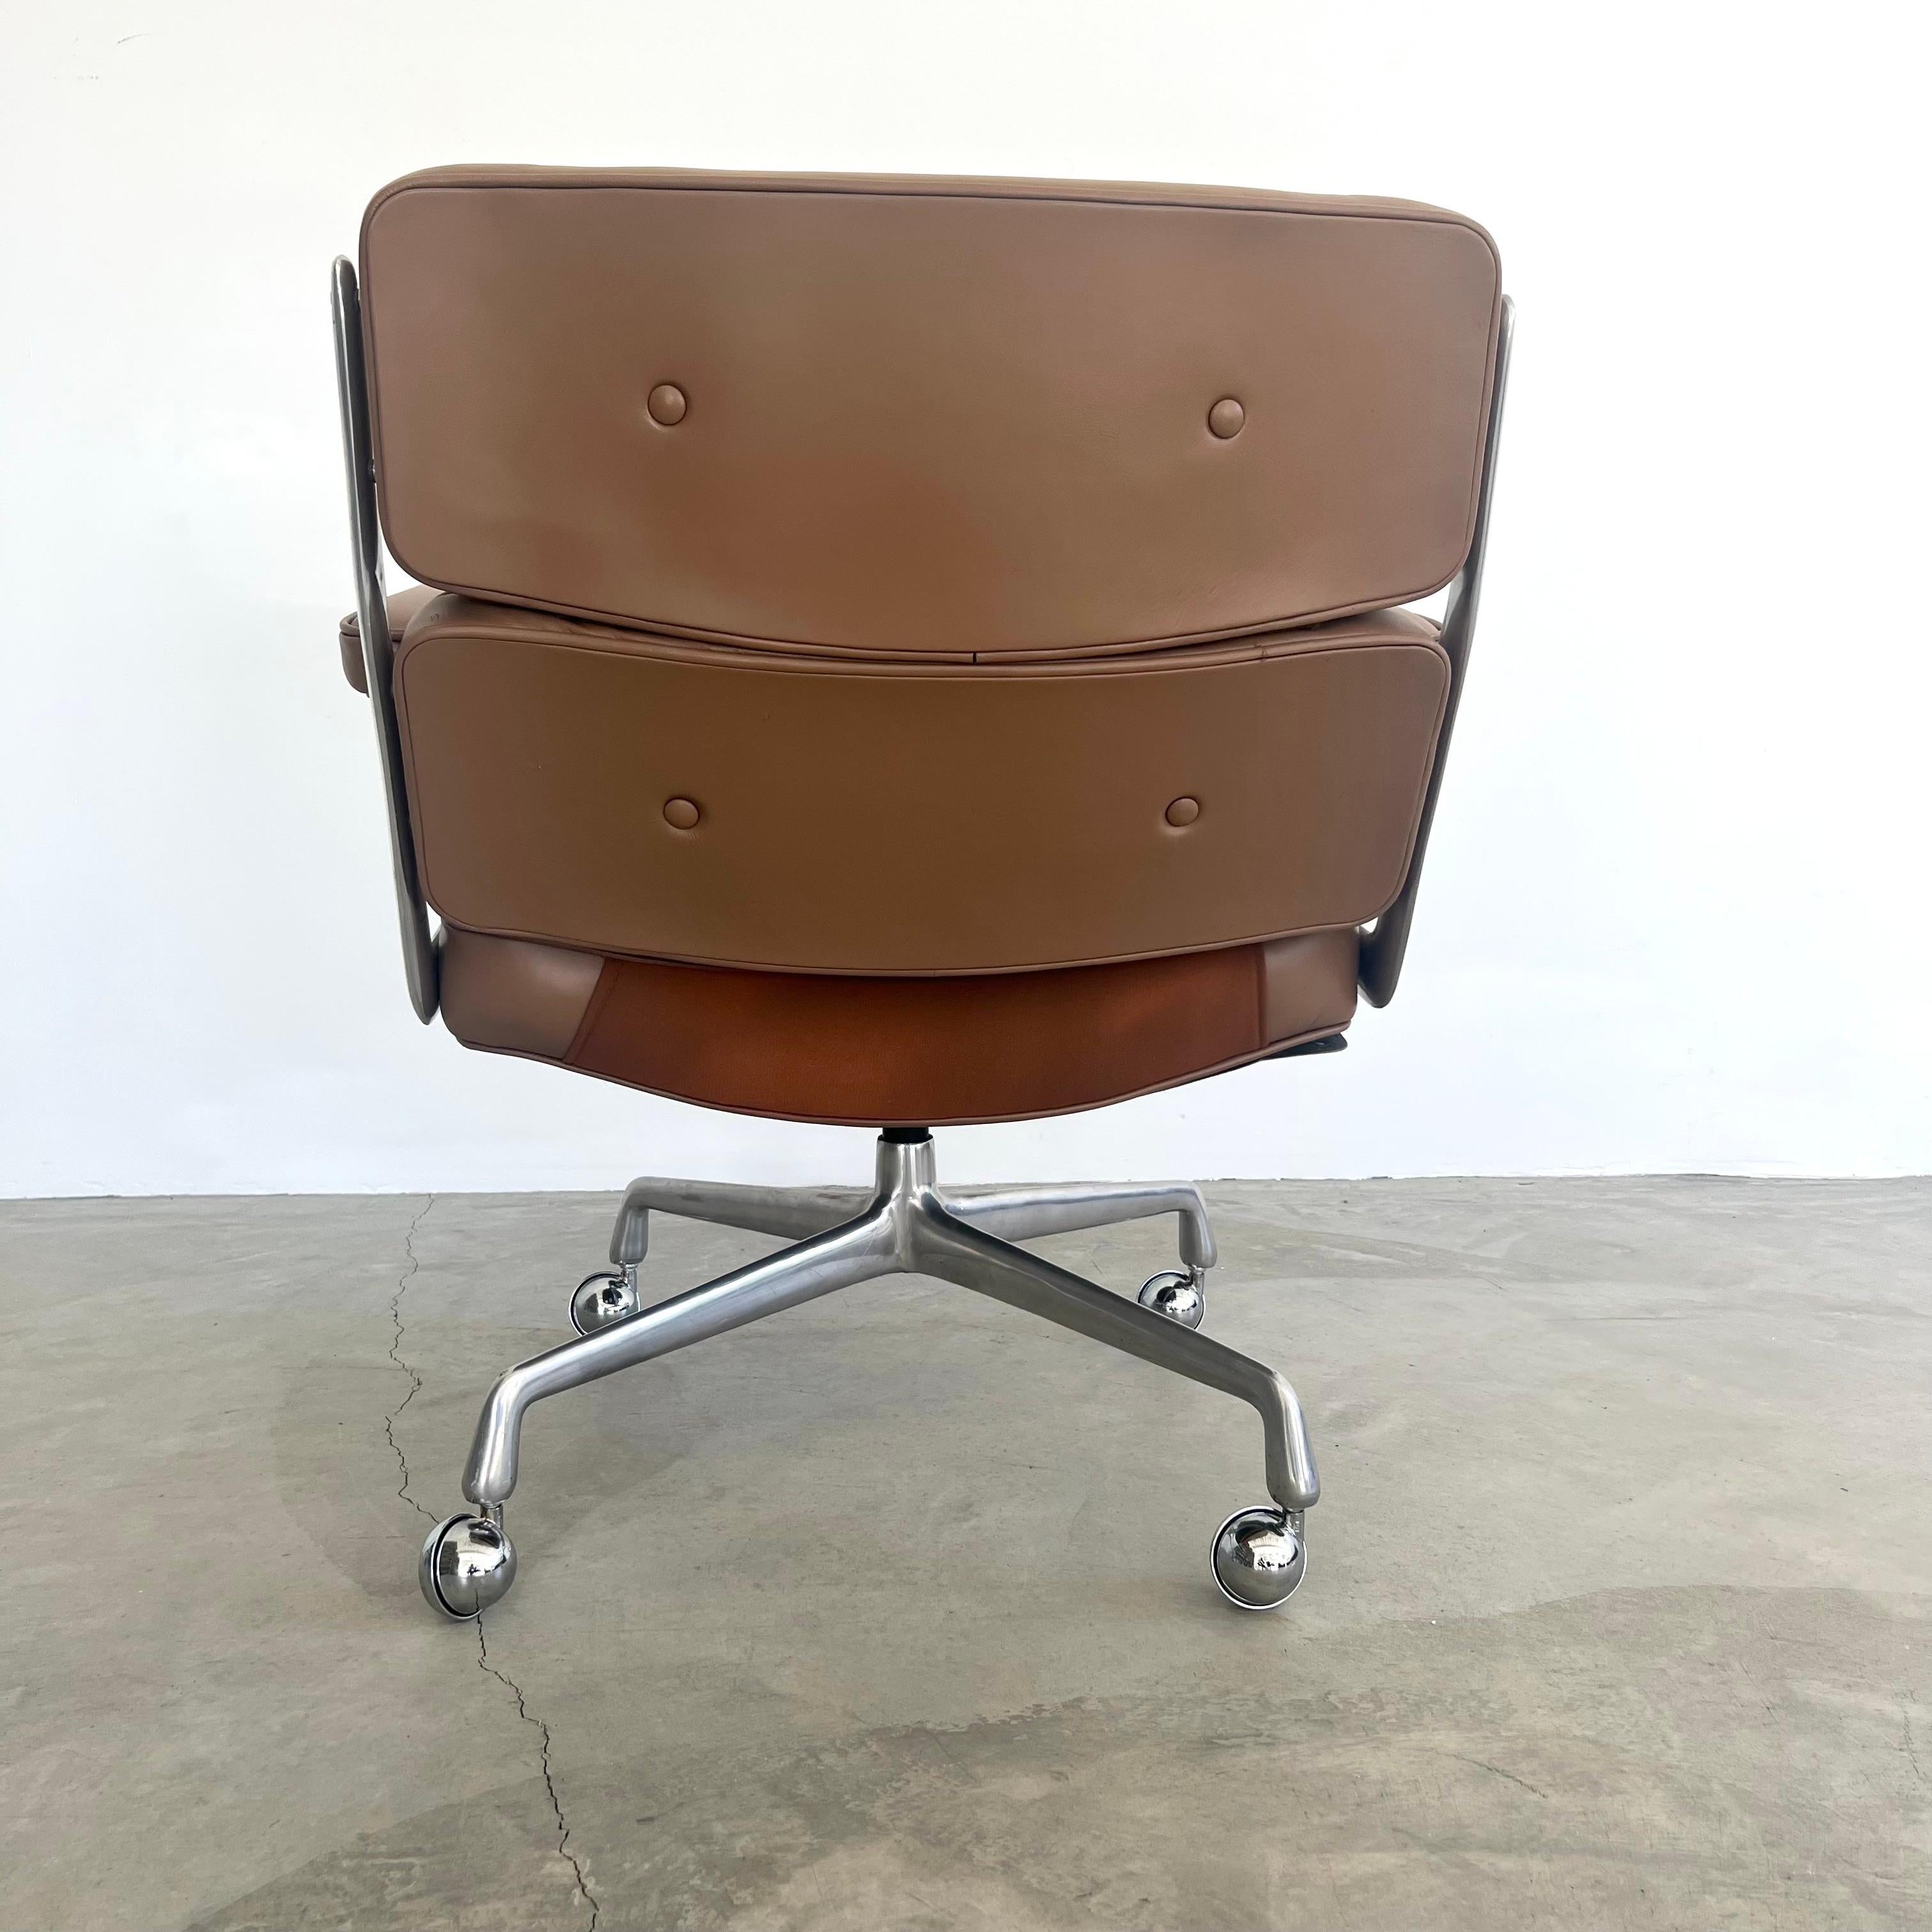 American Eames Time Life Lobby Lounge Chair in Tan Leather for Herman Miller, 1980s USA